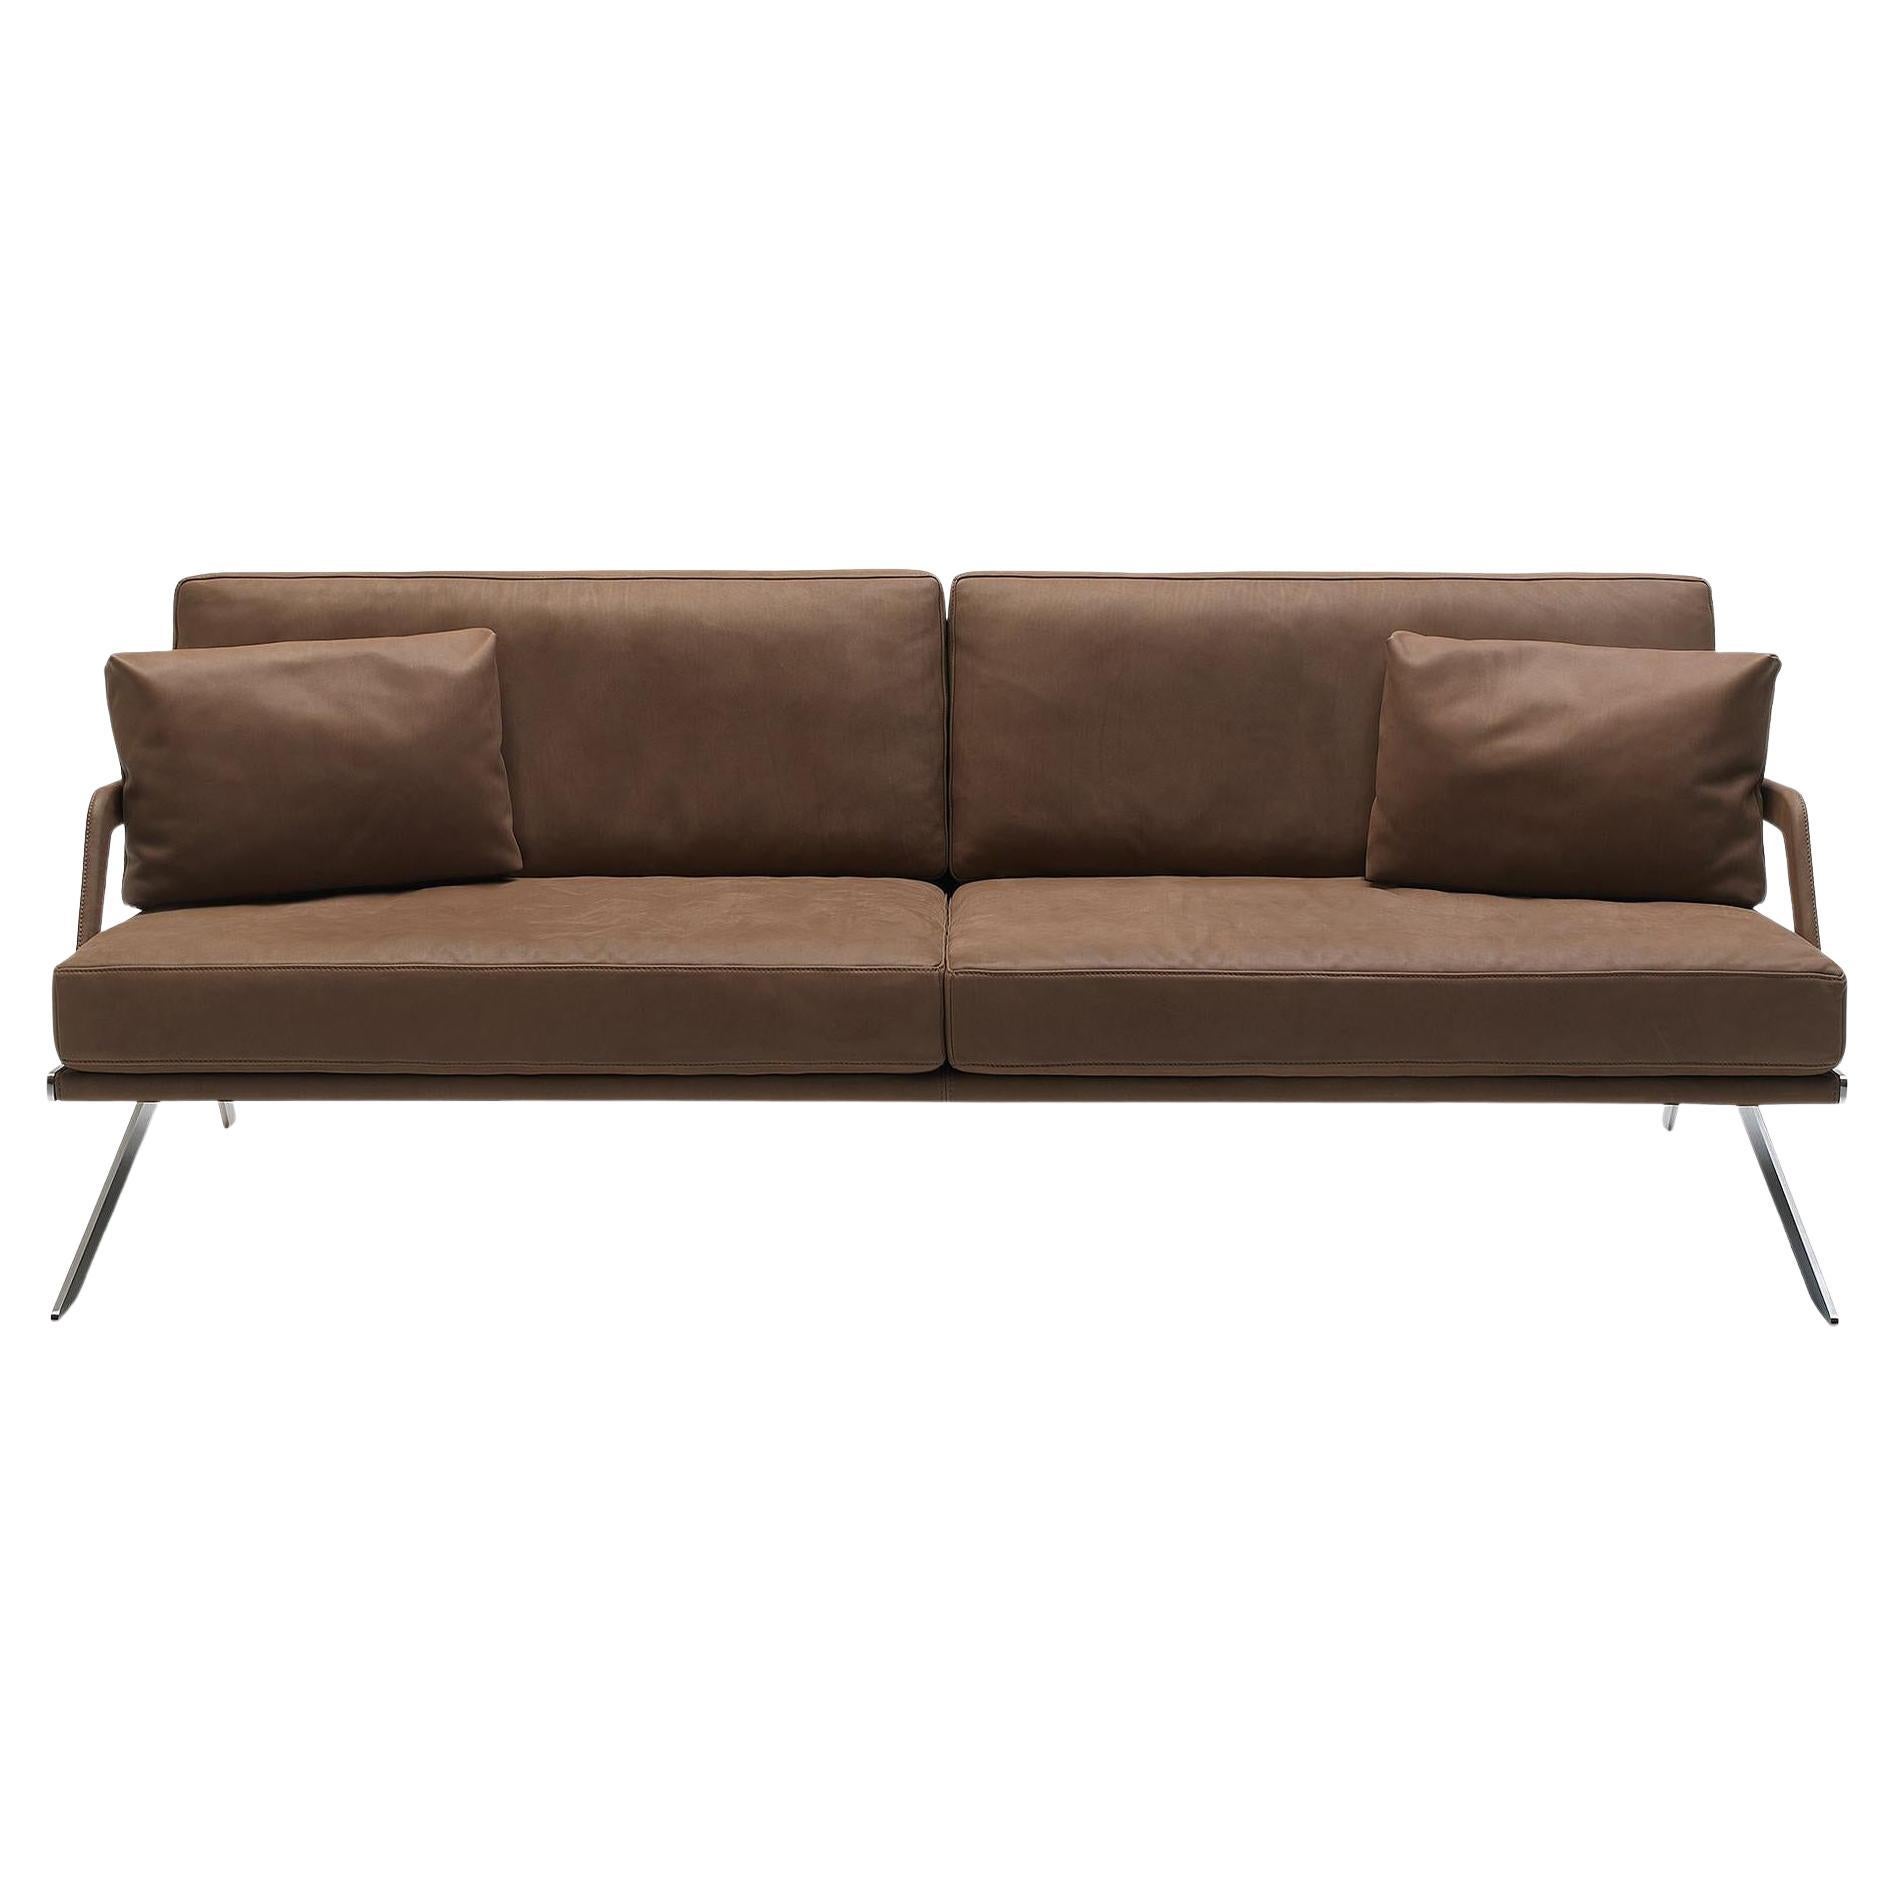 De Sede DS-60/03 Sofa in Brown Leather Upholstery by Gordon Guillaumier For Sale